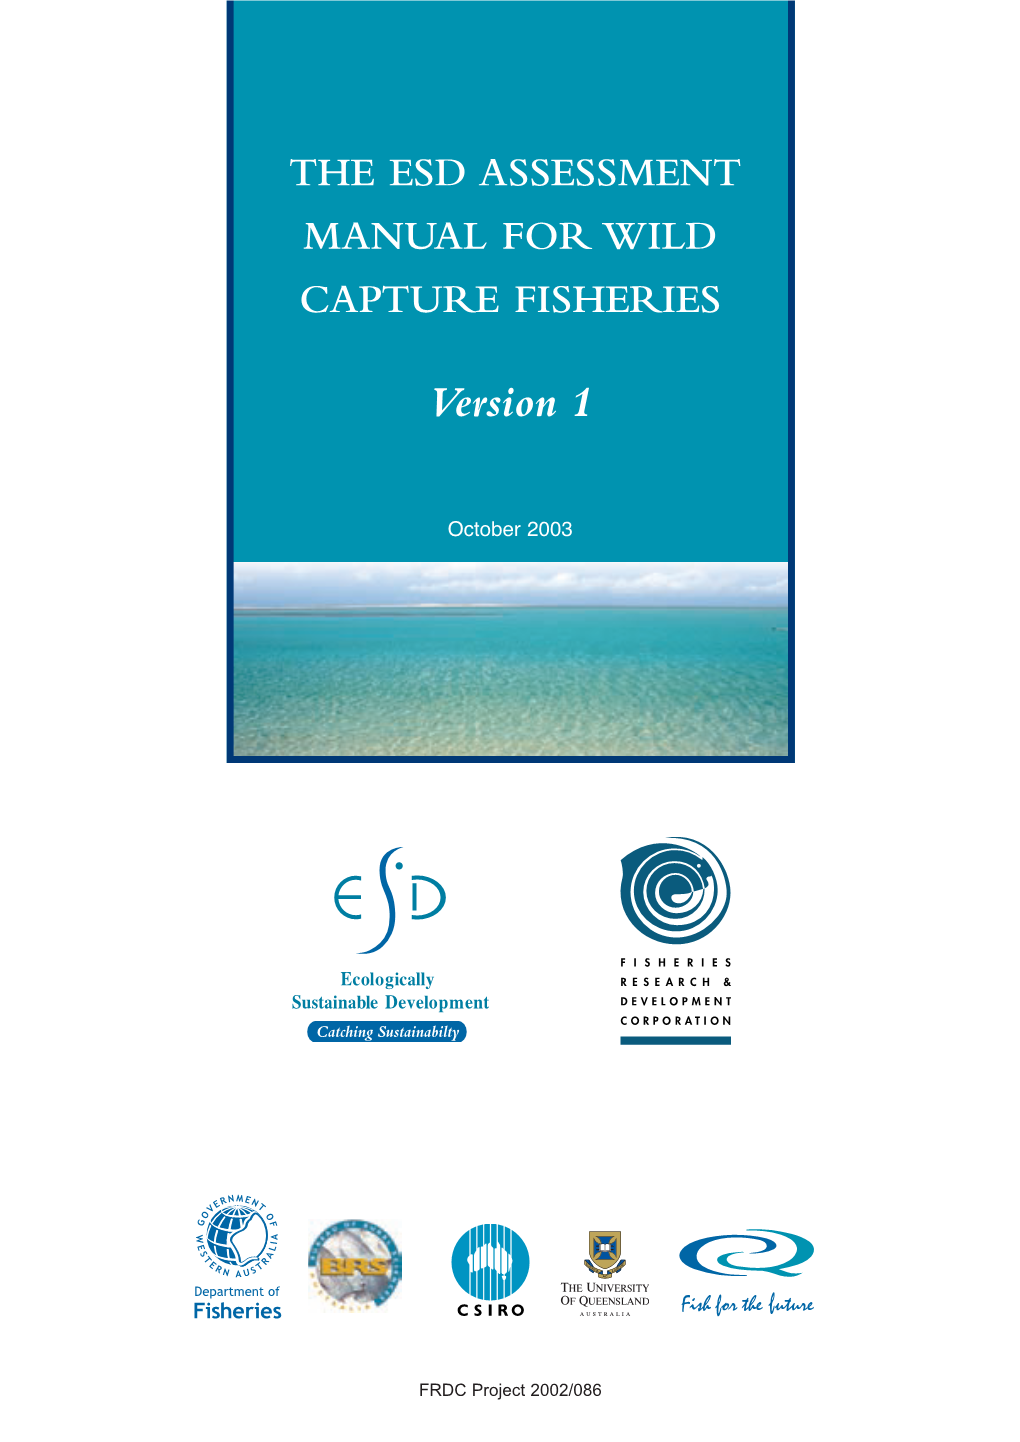 The Esd Assessment Manual for Wild Capture Fisheries